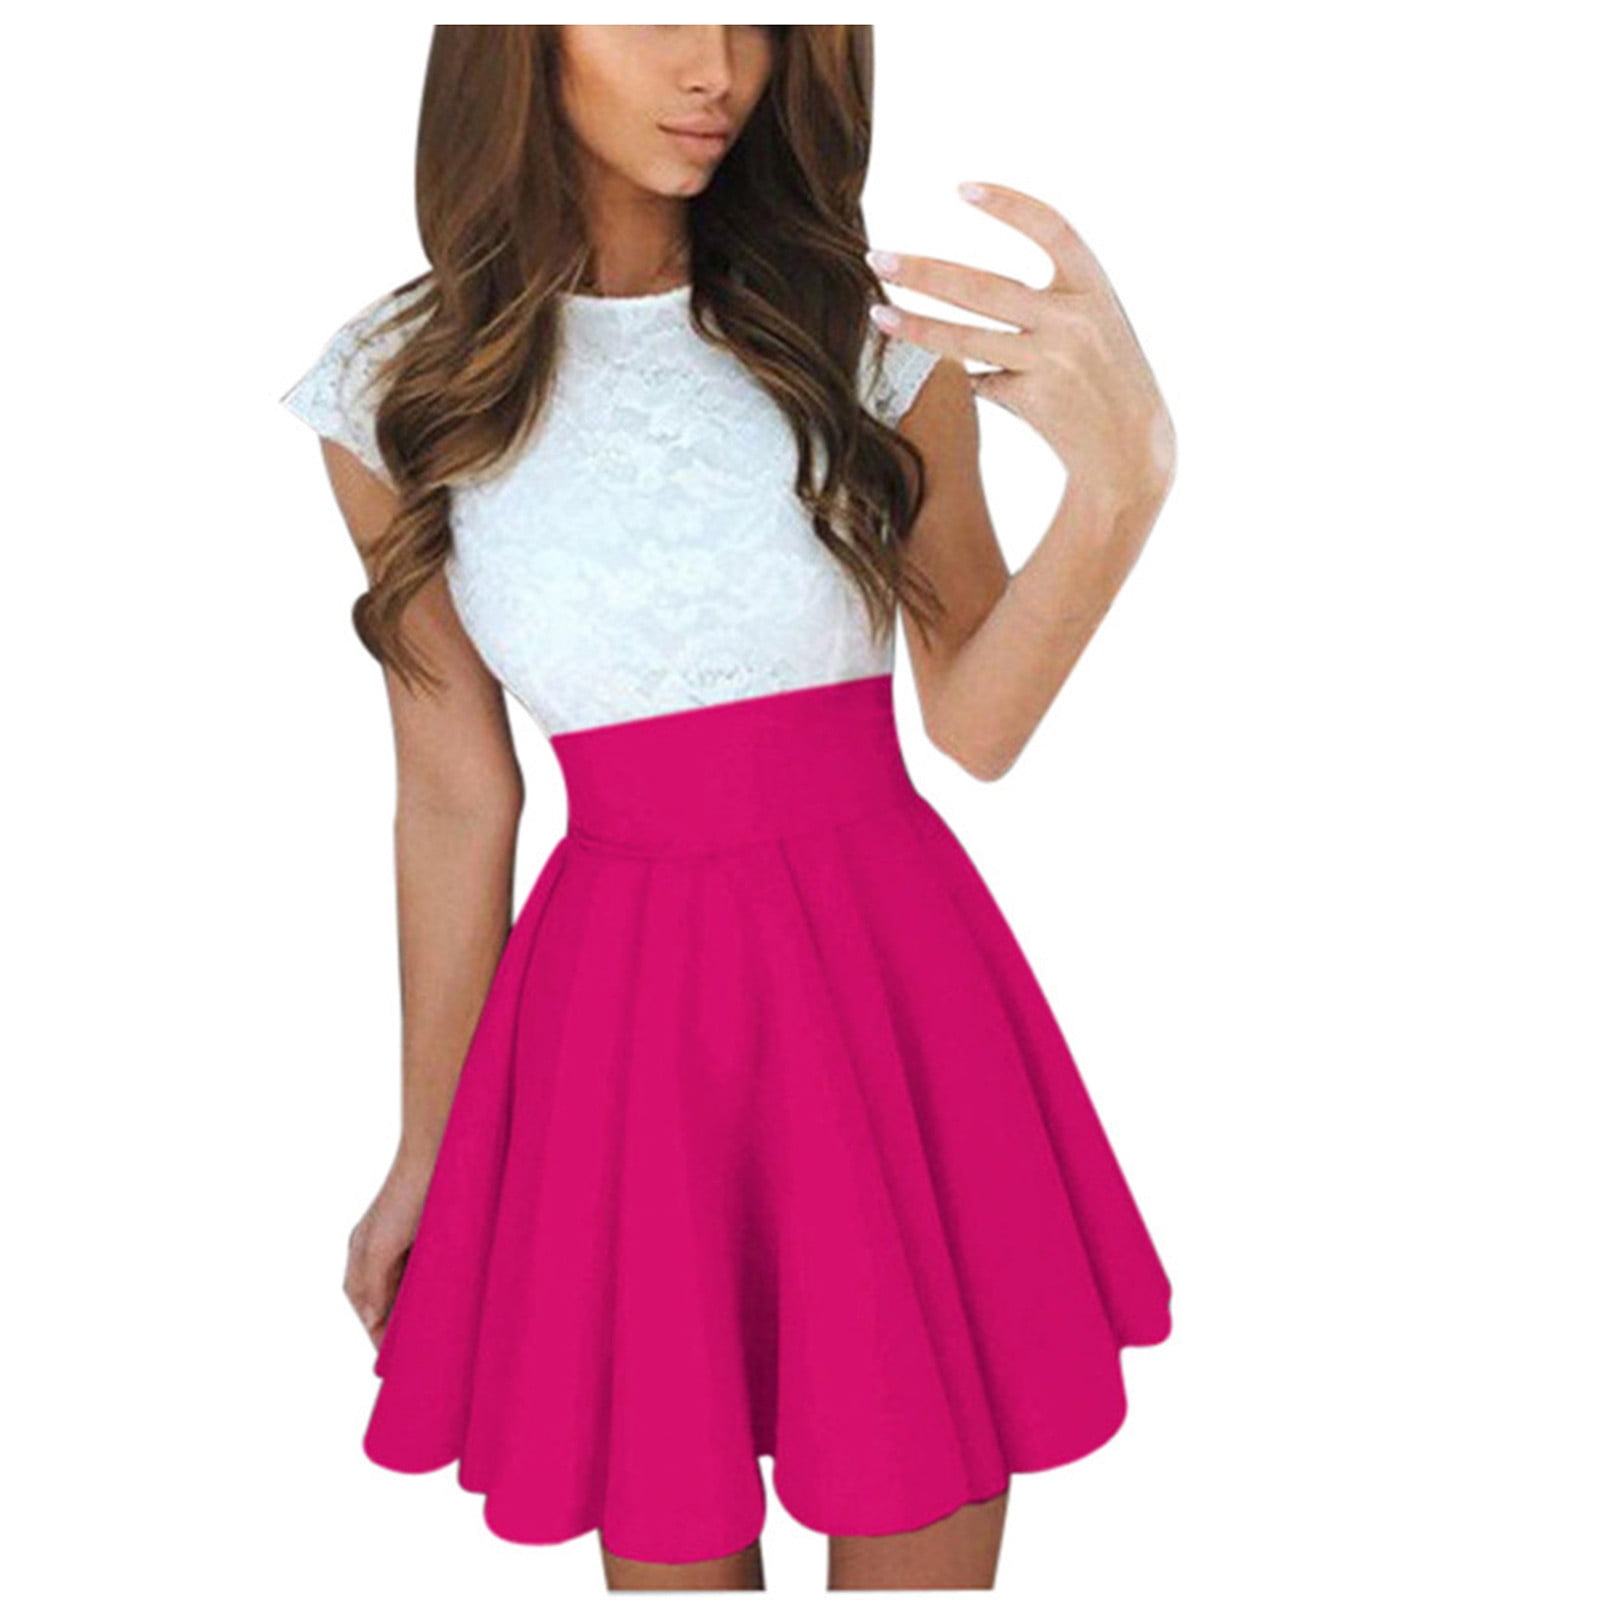 POKER Flowy Skater Dress, Stretchy Fitted Dress, Skater Skirt Women,  Ladies, Girls, Fun Date Night, Party, Cocktail, Cards, Las Vegas 